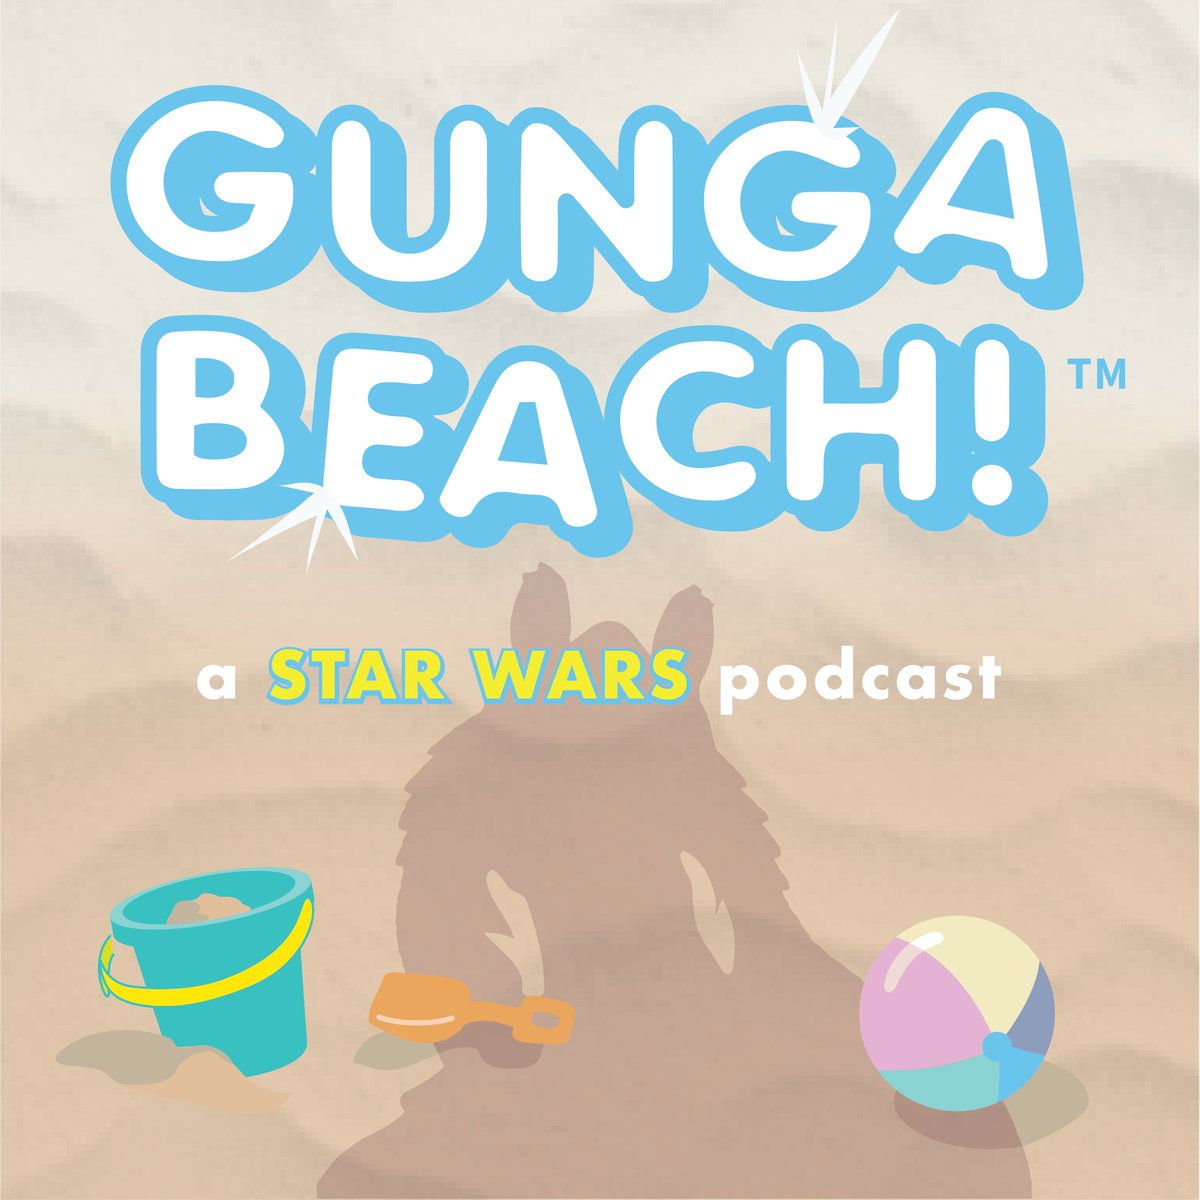 ✨ New ep of The Gunga Beach Podcast! ✨

Did Phantom Menace make our Star Wars Hall of Fame? 

What'll be the NEXT animated series?

Skeleton Crew sounds AMAZING!

& more! w/@Brett_Paci, @stevemac79

Listen ➜ tinyurl.com/GungaBeach14 
Subscribe ➜ tinyurl.com/GungaBeach